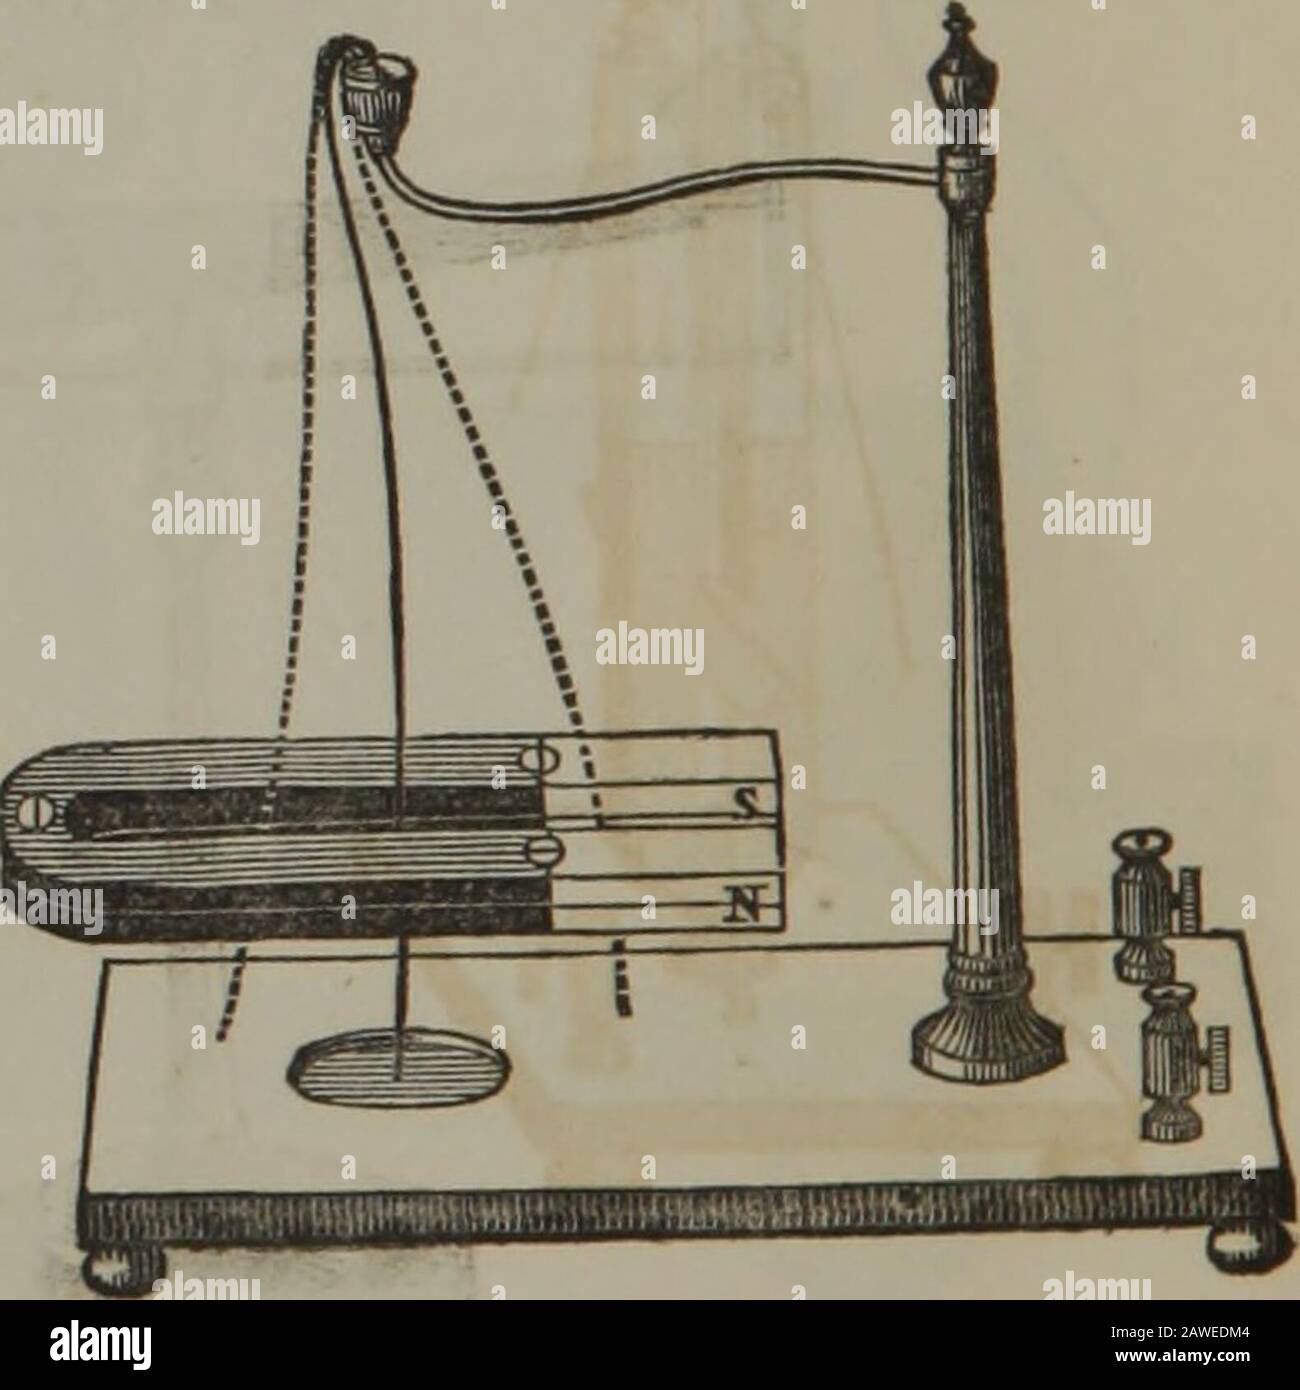 Catalogue of apparatus, to illustrate magnetism, galvanism, electrodynamics, electromagnetism, magno-electricity . Fig. oo. Upright Galvanometer. Price $5.00.Fig. 61. Vibrating Wire, (with magnet.) Price $5.00. OP AFPARATI 8. Fig. 39. 17 Stock Photo